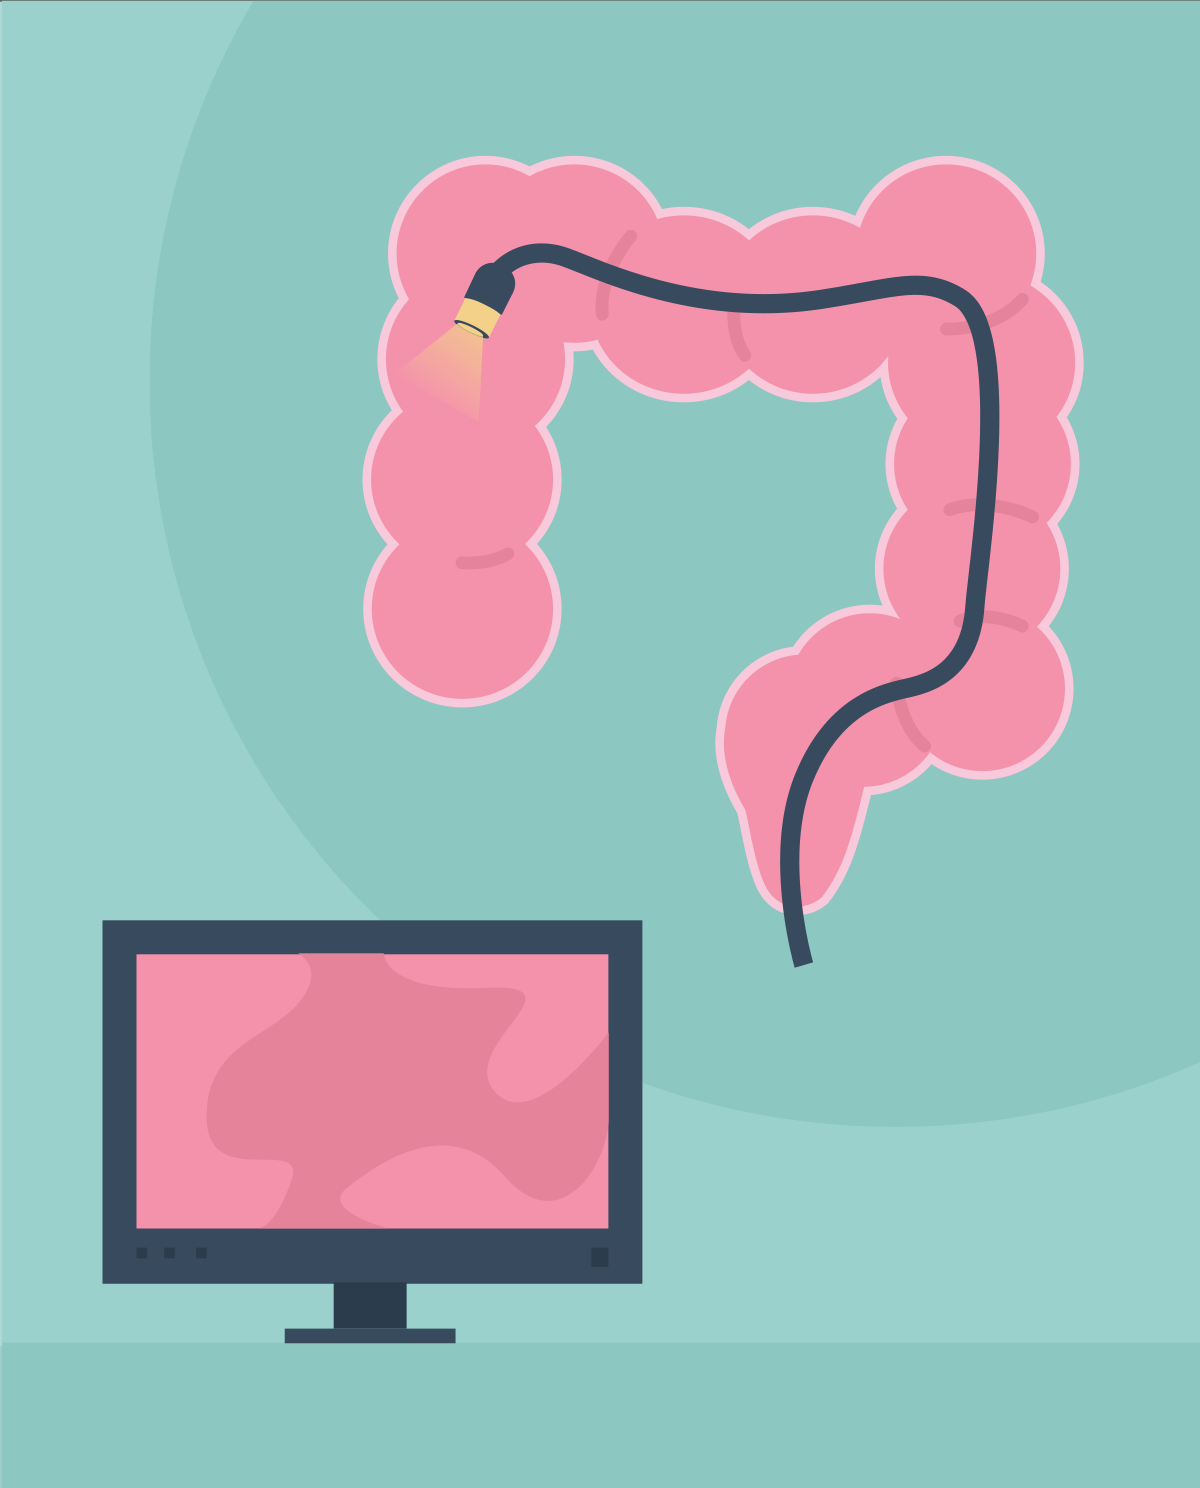 Colonoscopy - what is it and how do you prepare for it?